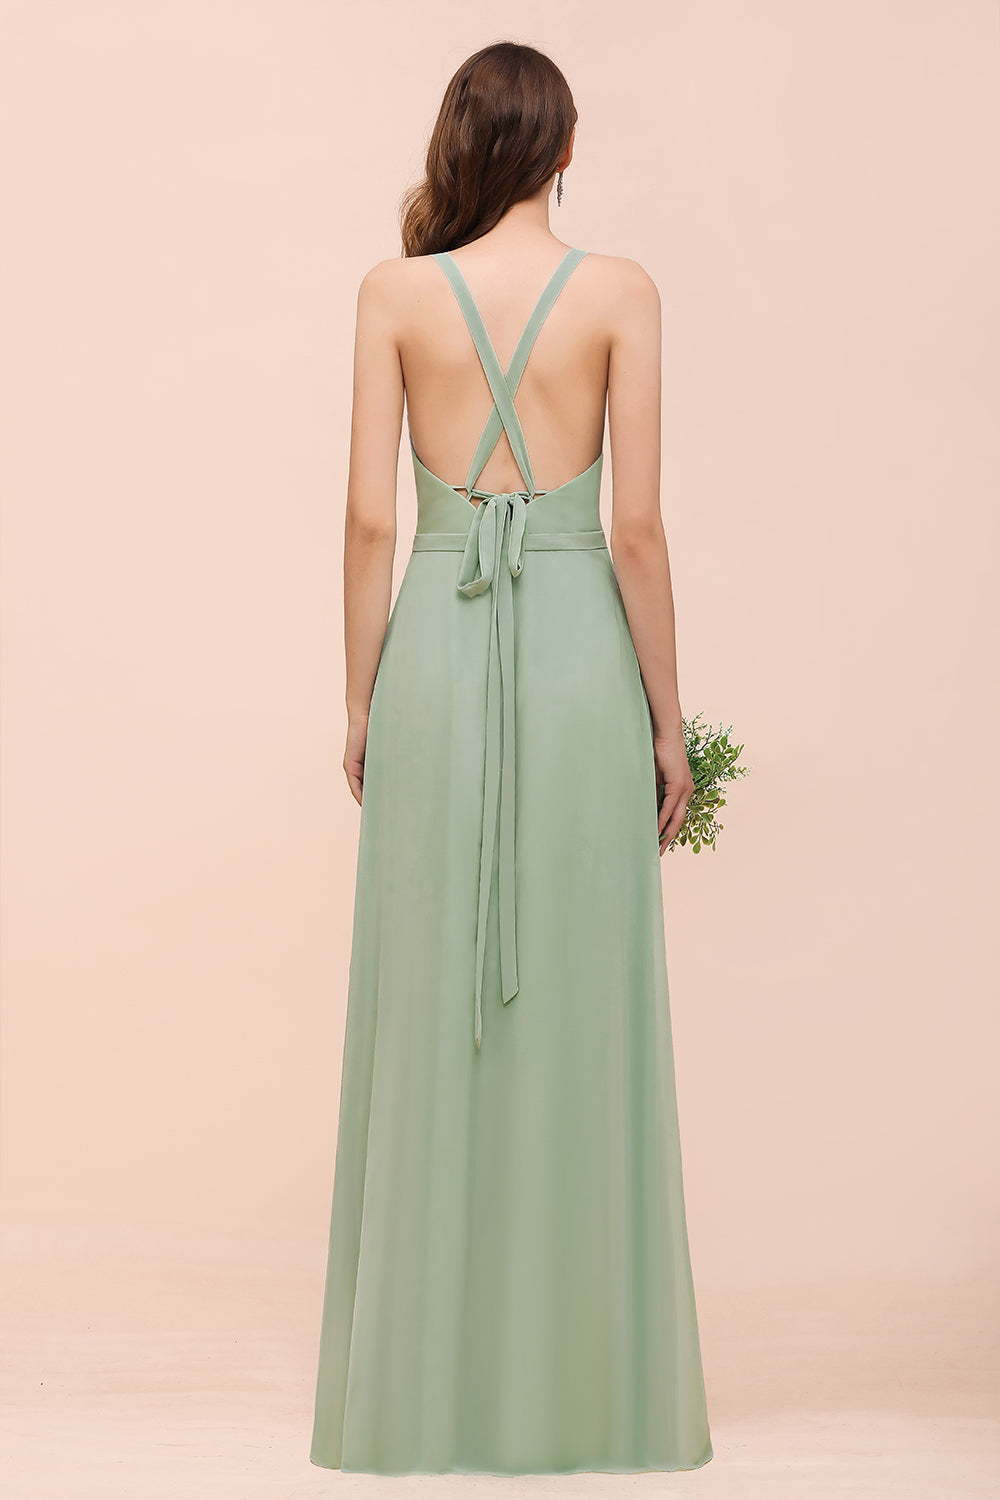 Load image into Gallery viewer, Glamorous Dusty Sage V-Neck Straps Affordable Bridesmaid Dress-27dress
